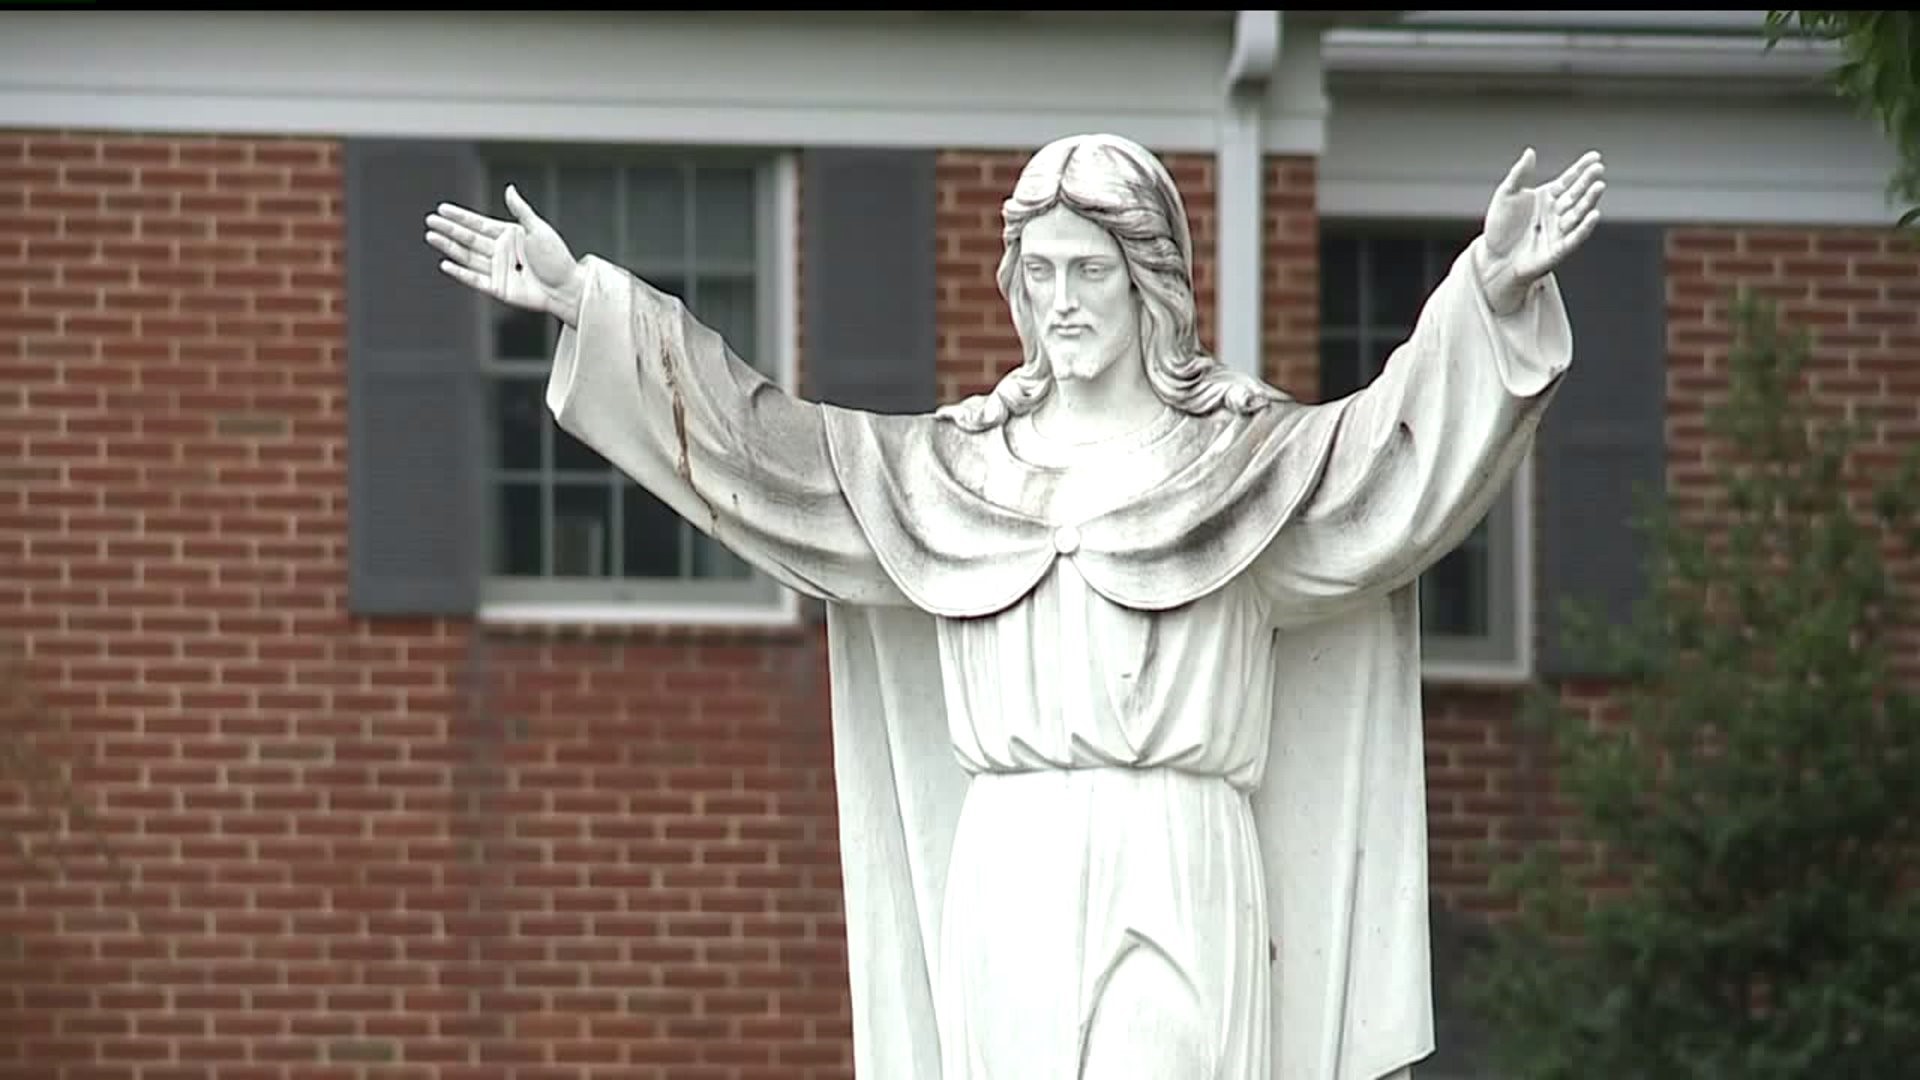 Grand jury report to be released Tuesday, for the Harrisburg Diocese child sex abuse case